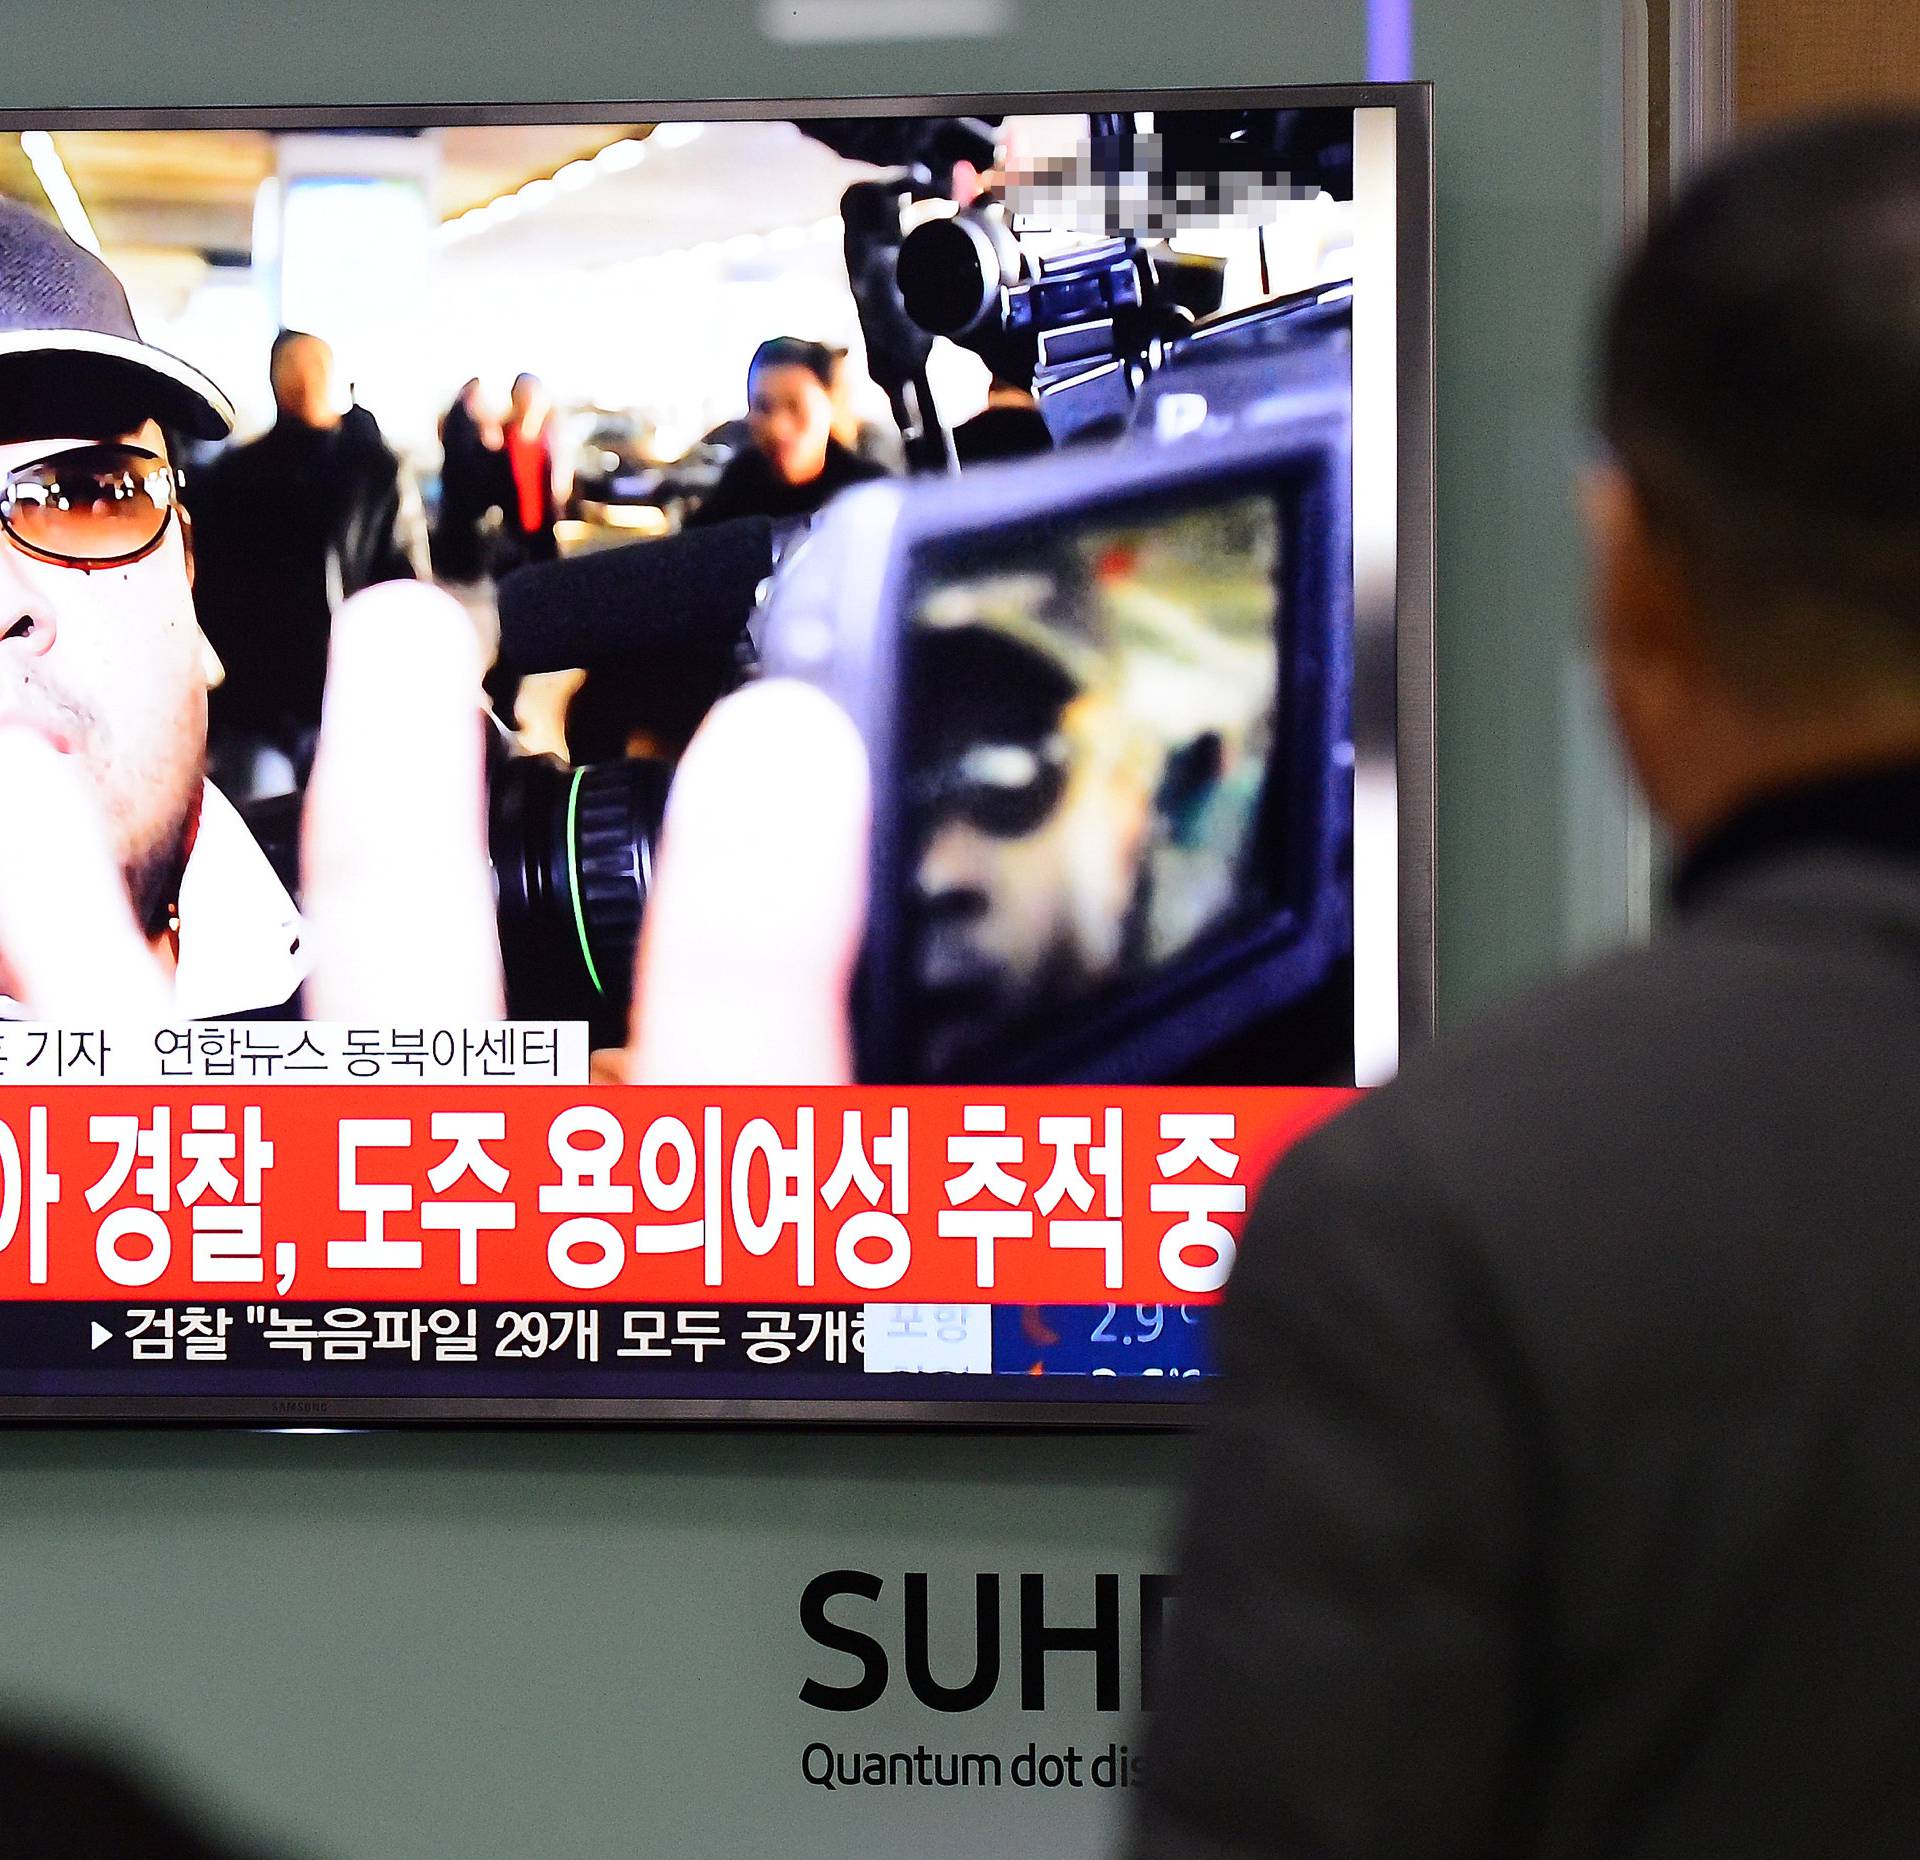 People watch a TV screen broadcasting a news report on the assassination of Kim Jong Nam, the older half brother of the North Korean leader Kim Jong Un, at a railway station in Seoul